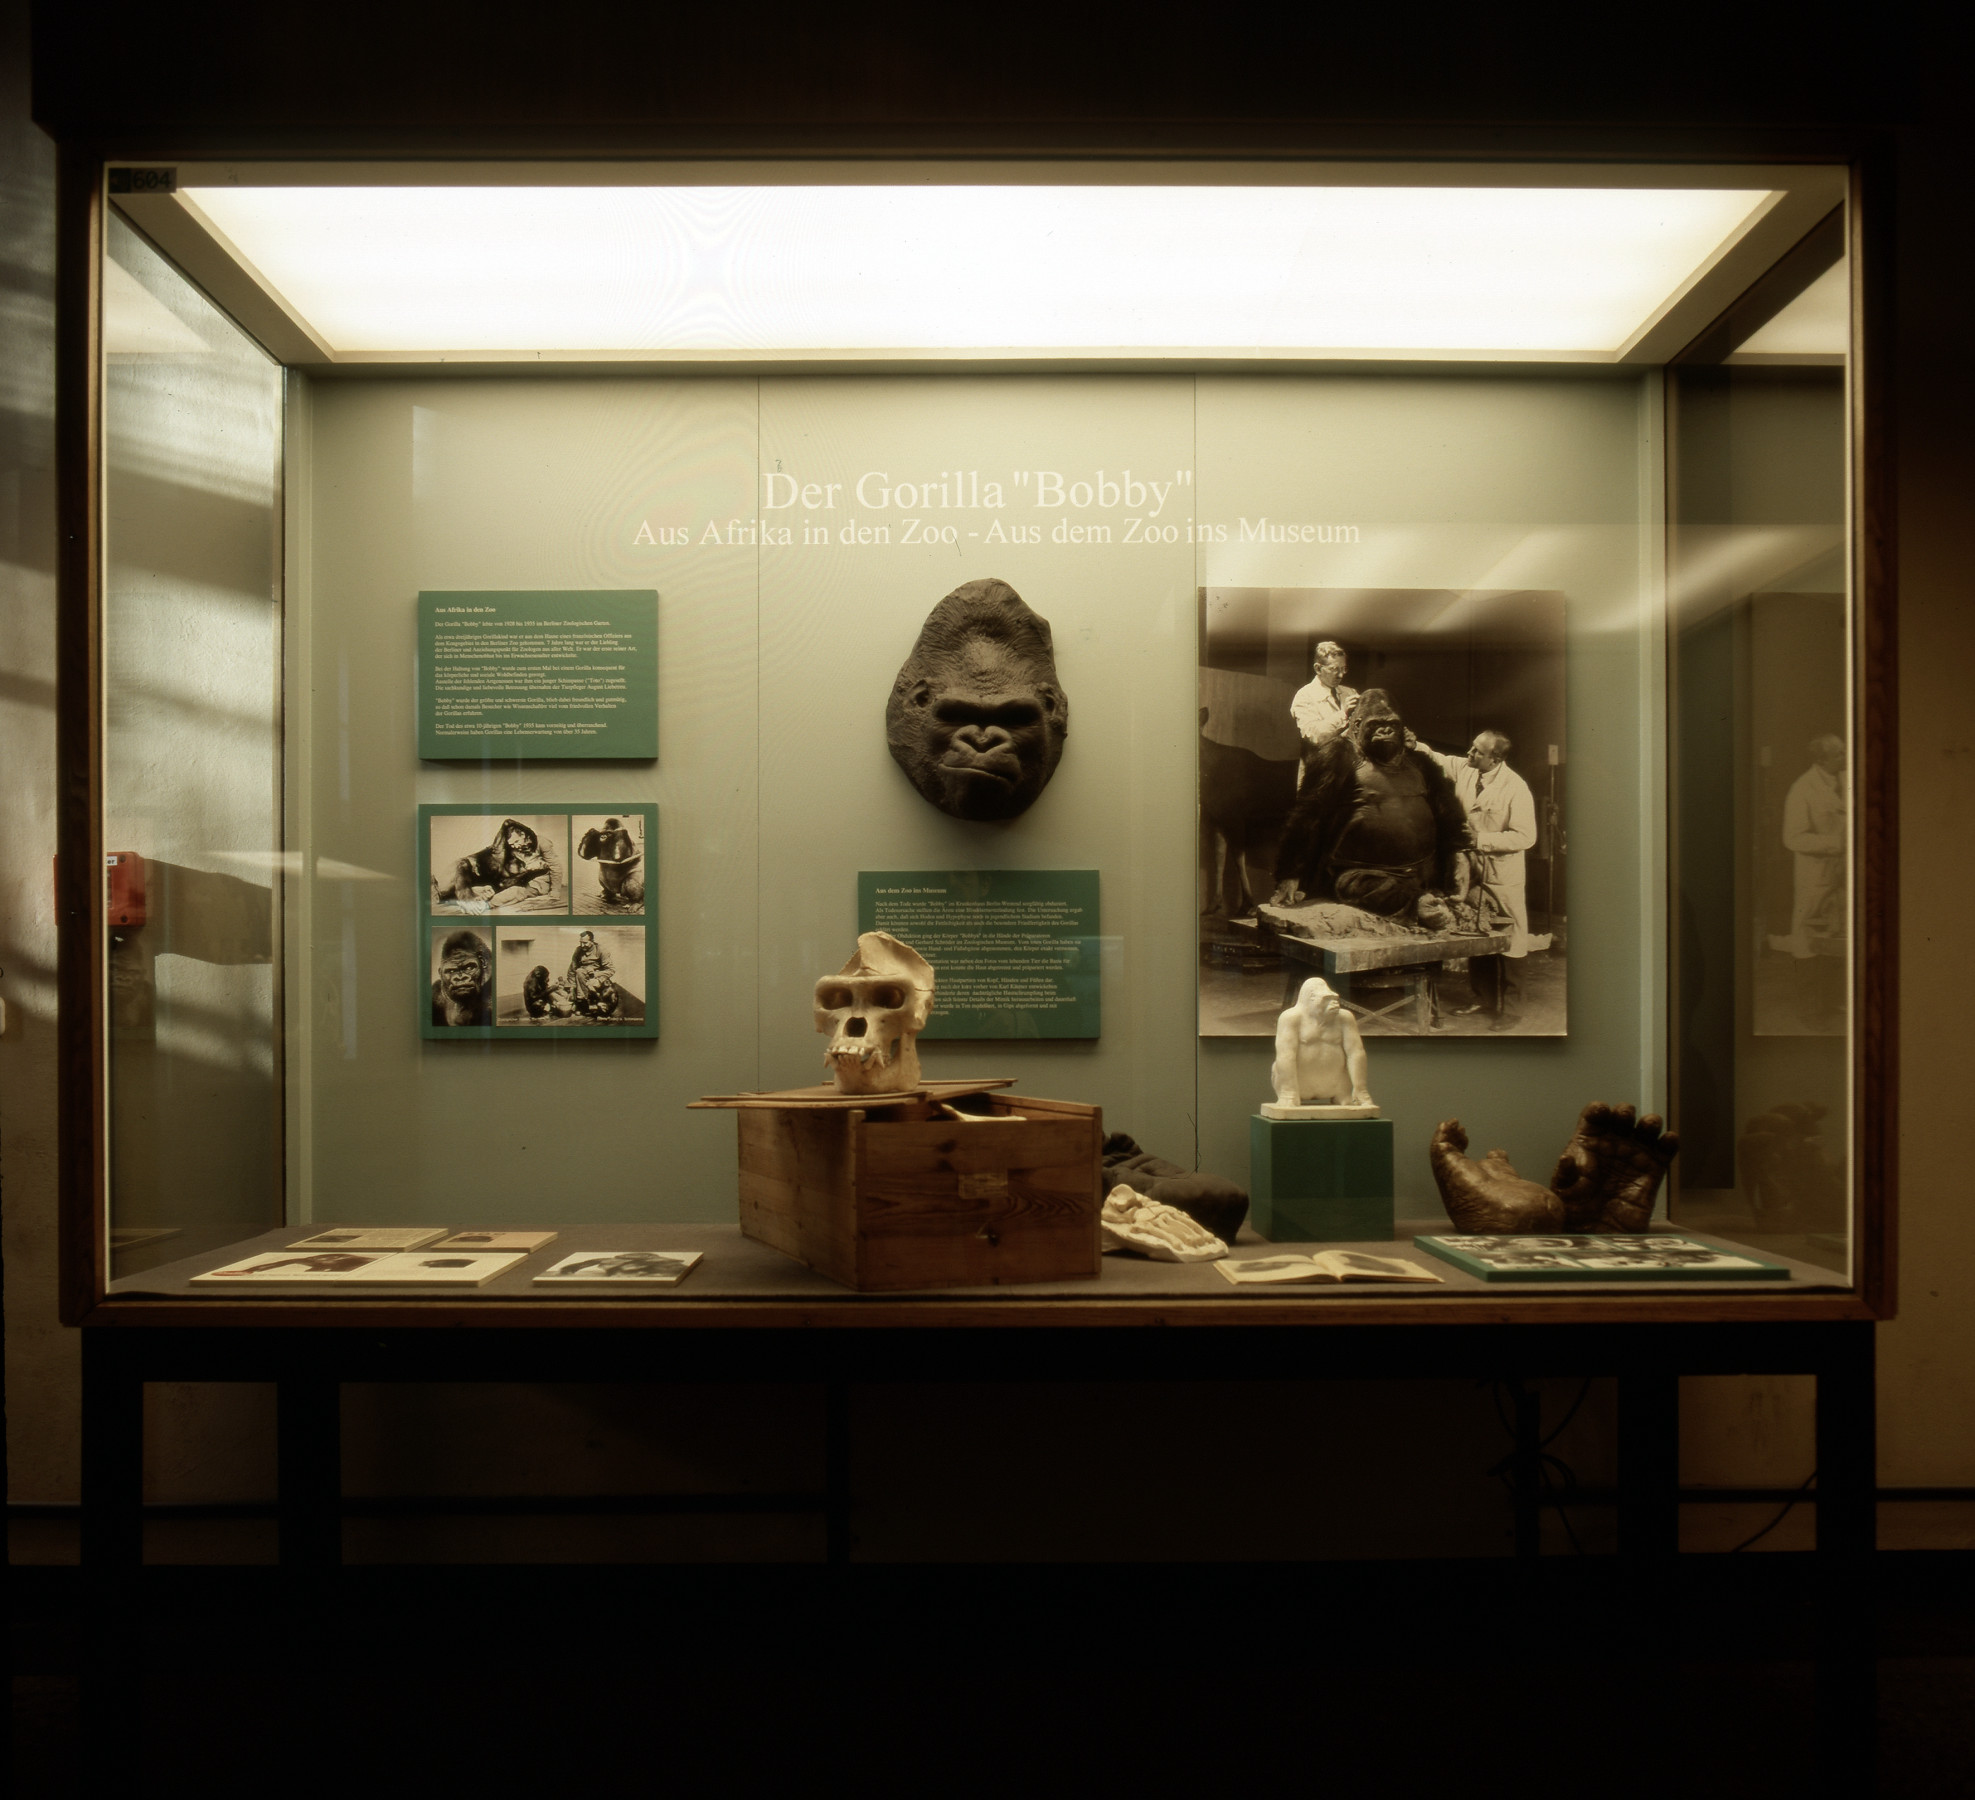 Glass case with the caption "The Gorilla 'Bobby': From Africa to the Zoo – From the Zoo to the Museum". In the centre of the case is a death mask of "Bobby’s" face, framed by panels with writing on them and photographs of, e.g., him alive at the zoo and during his later preparation. On display are also photos of his skull as well as models and casts of individual body parts.